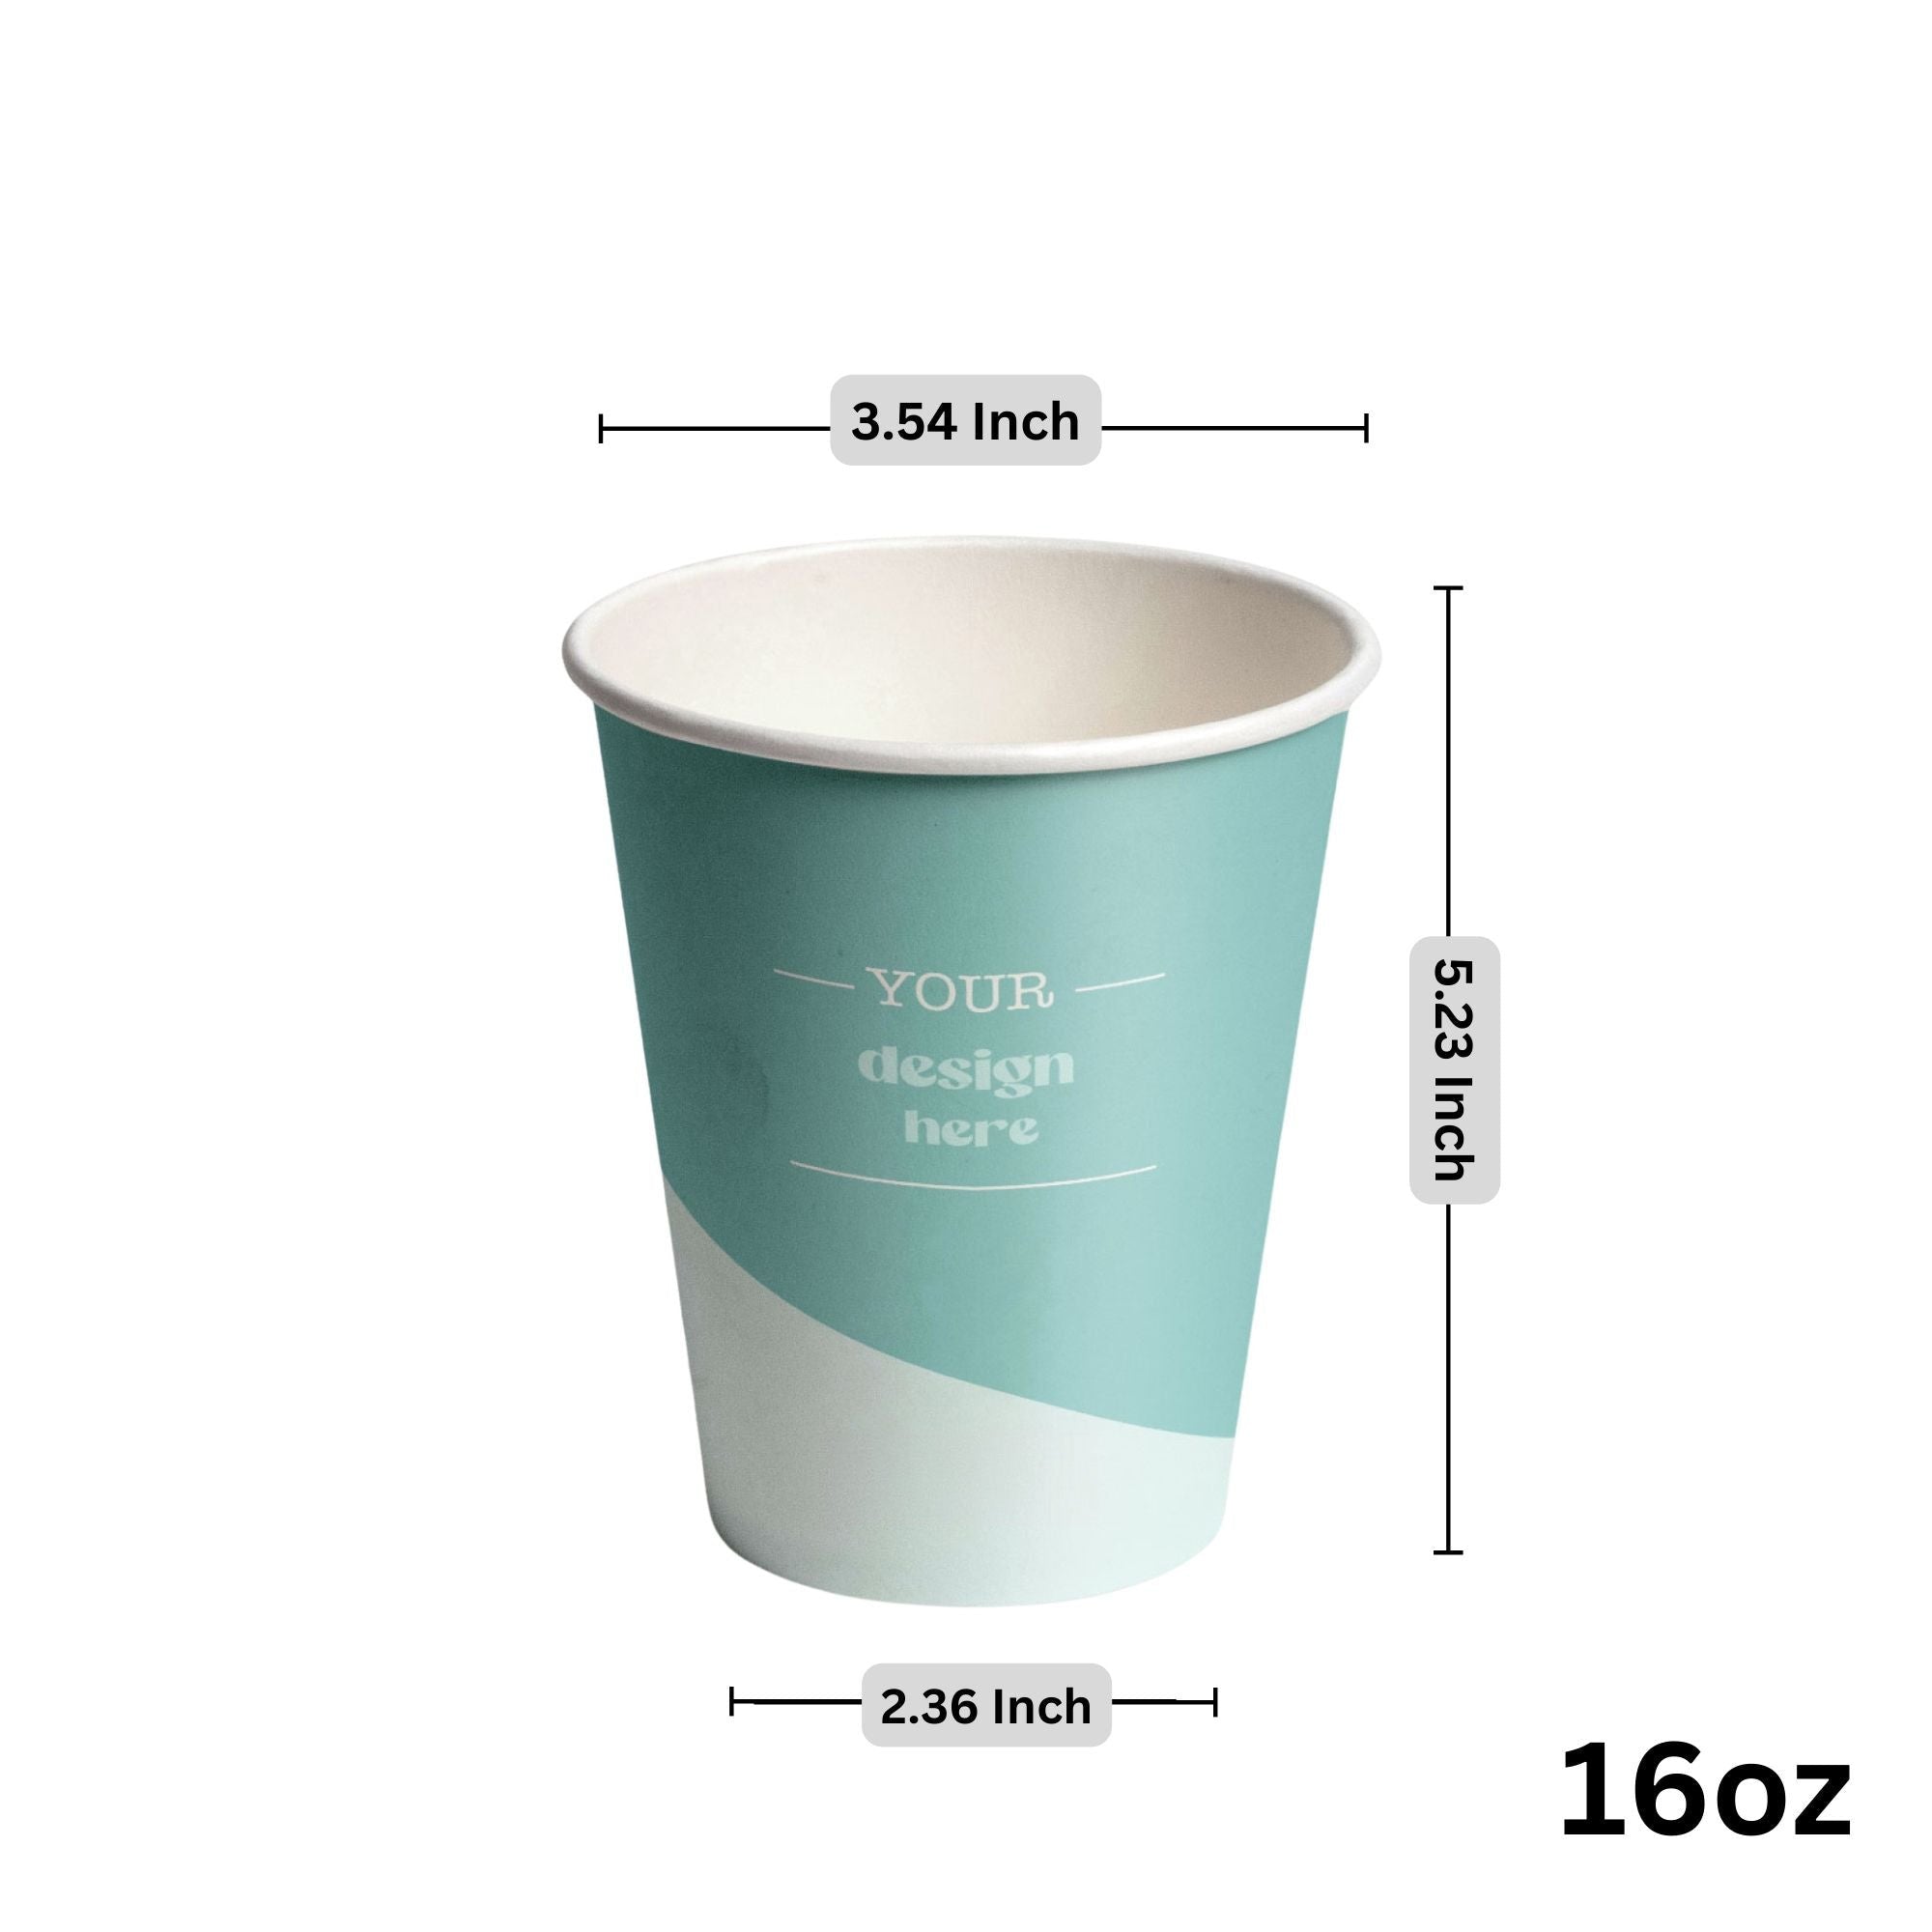 Single Wall Custom Coffee Paper Cup, avoid leaks, durable, warming, biodegradable, freshness, takeout, Packaging, easy visibility, food safe, avoid leaks, high-quality, dinnerware, Ecosmart, sustainable, coffee, tea, epitomize, biodegradable, renewable, hot chocolate, morning coffee, double-walled cups, freshness, takeout, Packaging, avoid spills, food safe, microwavable, elegance, dinnerware, strong, resilient, avoid leaks, restaurants, perfect choice, bulk pack, party cups, Leak Resistant